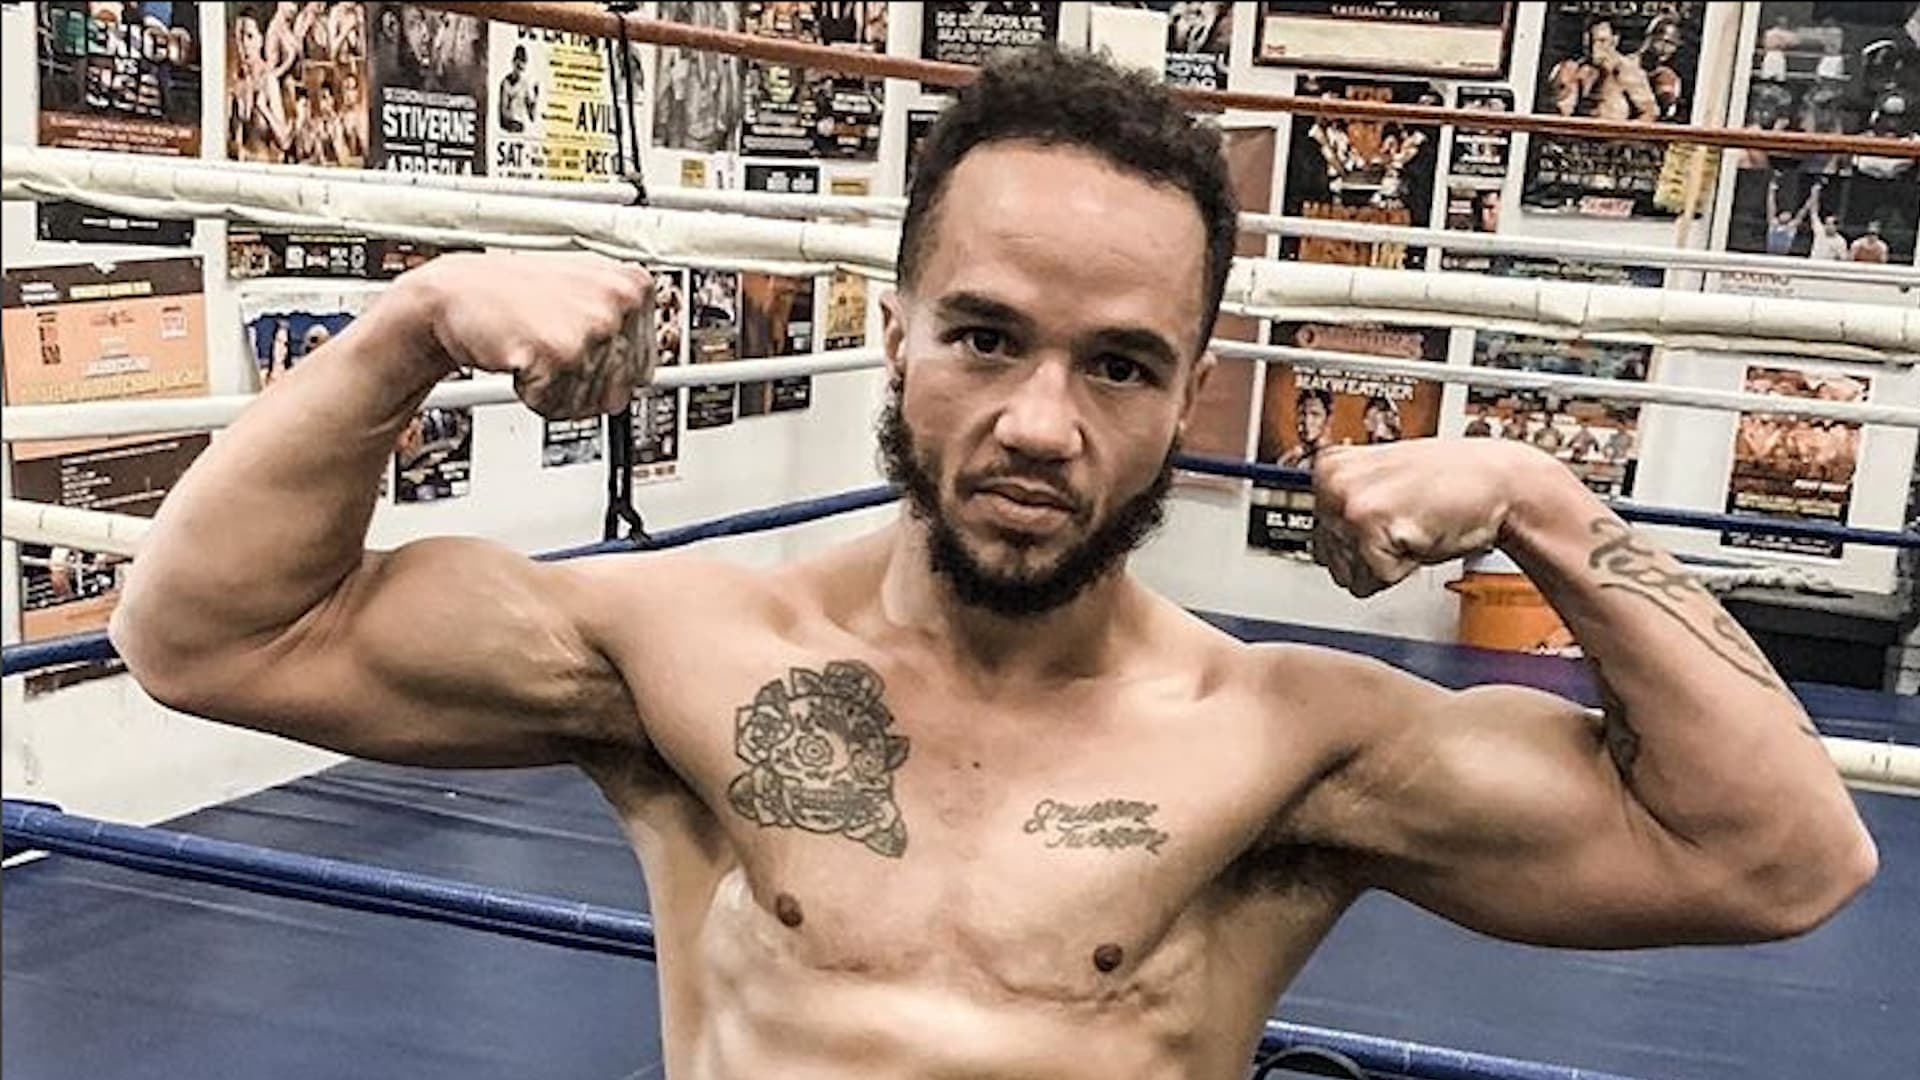 Transgender boxer Pat Manuel makes history with first professional image